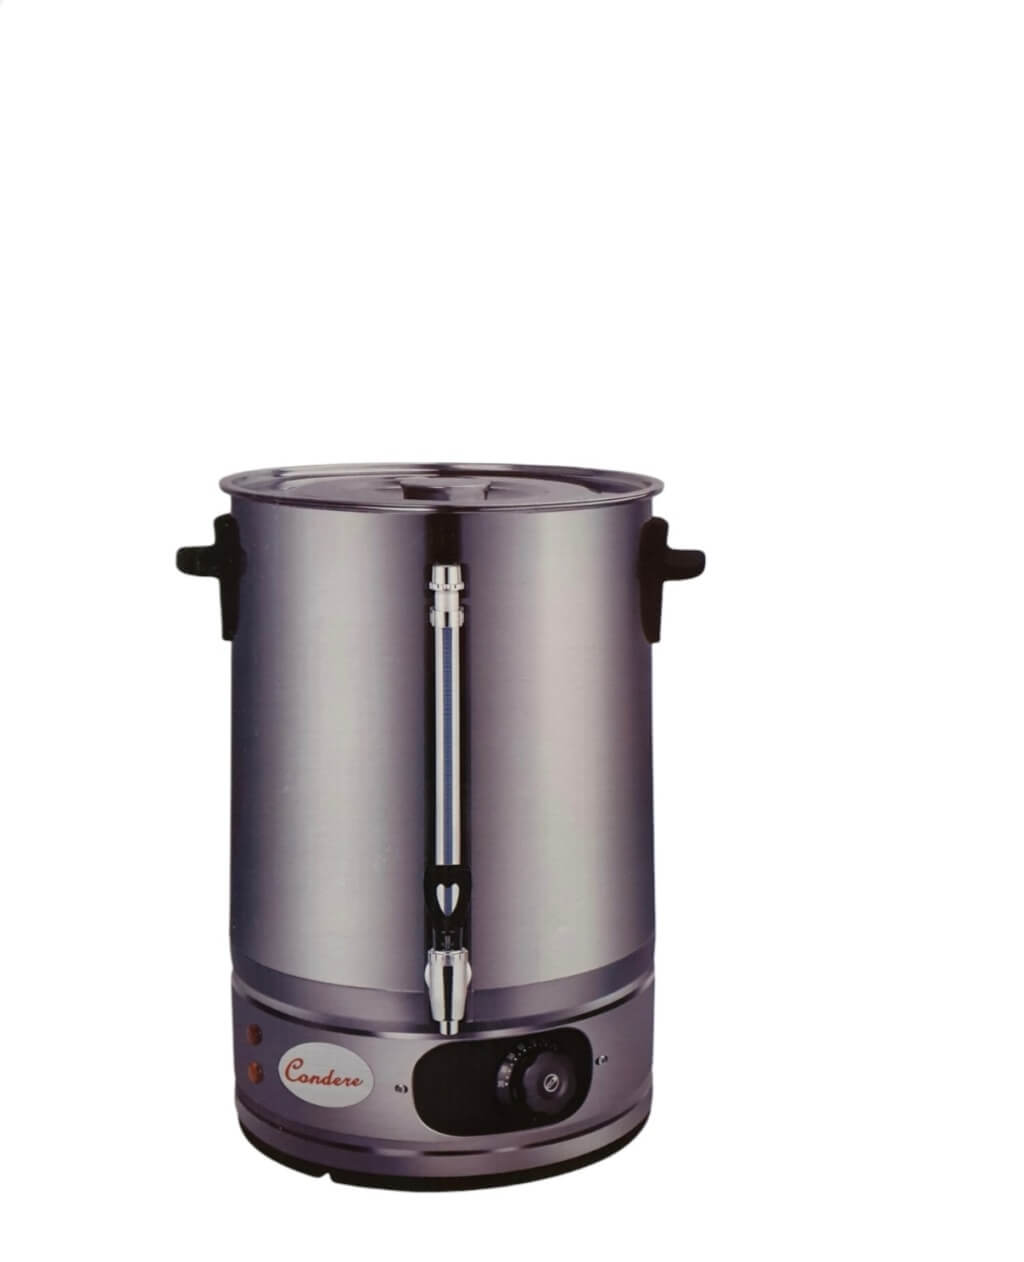 48L Condere Electric Urn Stainless Steel